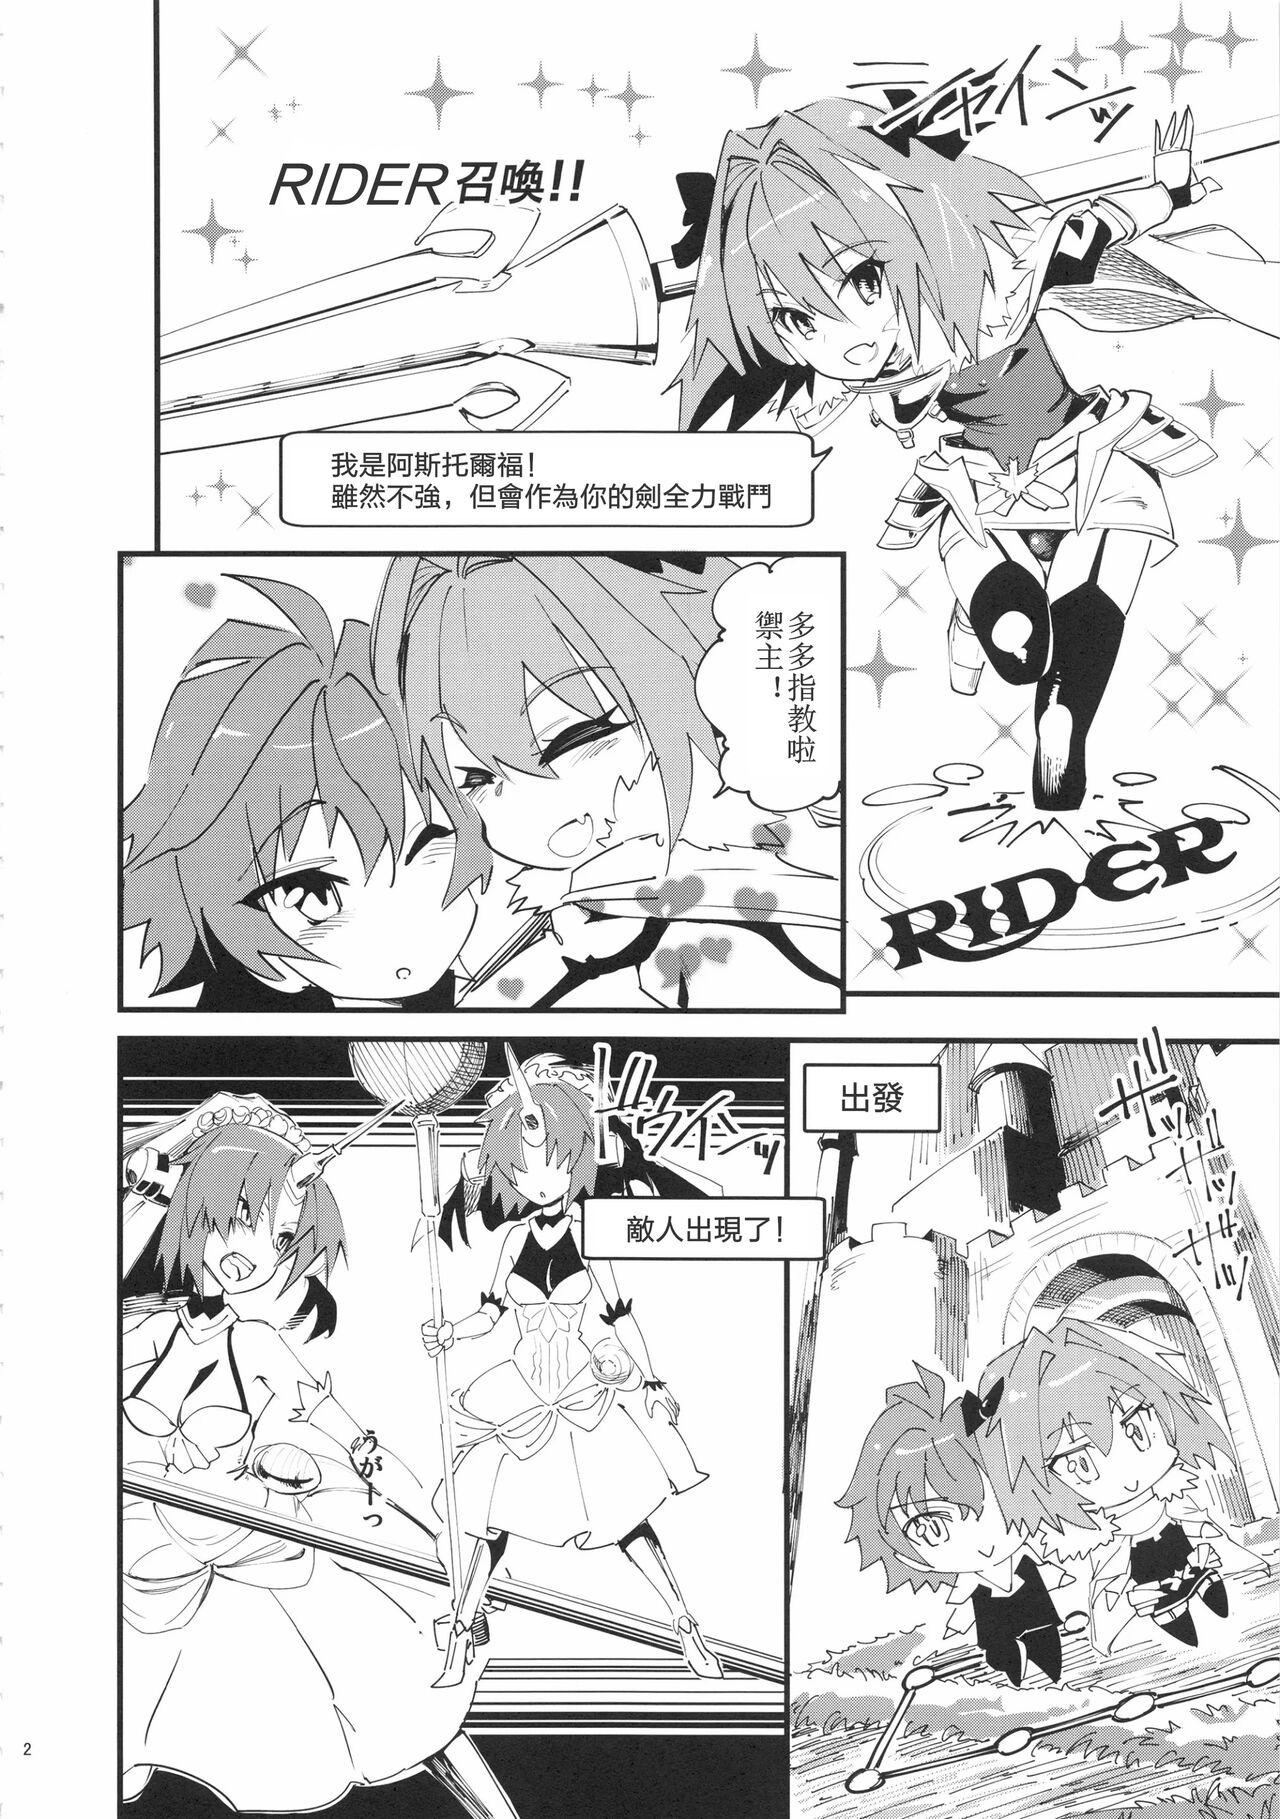 Pawg CLASS CHANGE!! Brave Astolfo - Fate apocrypha Corrida - Page 4